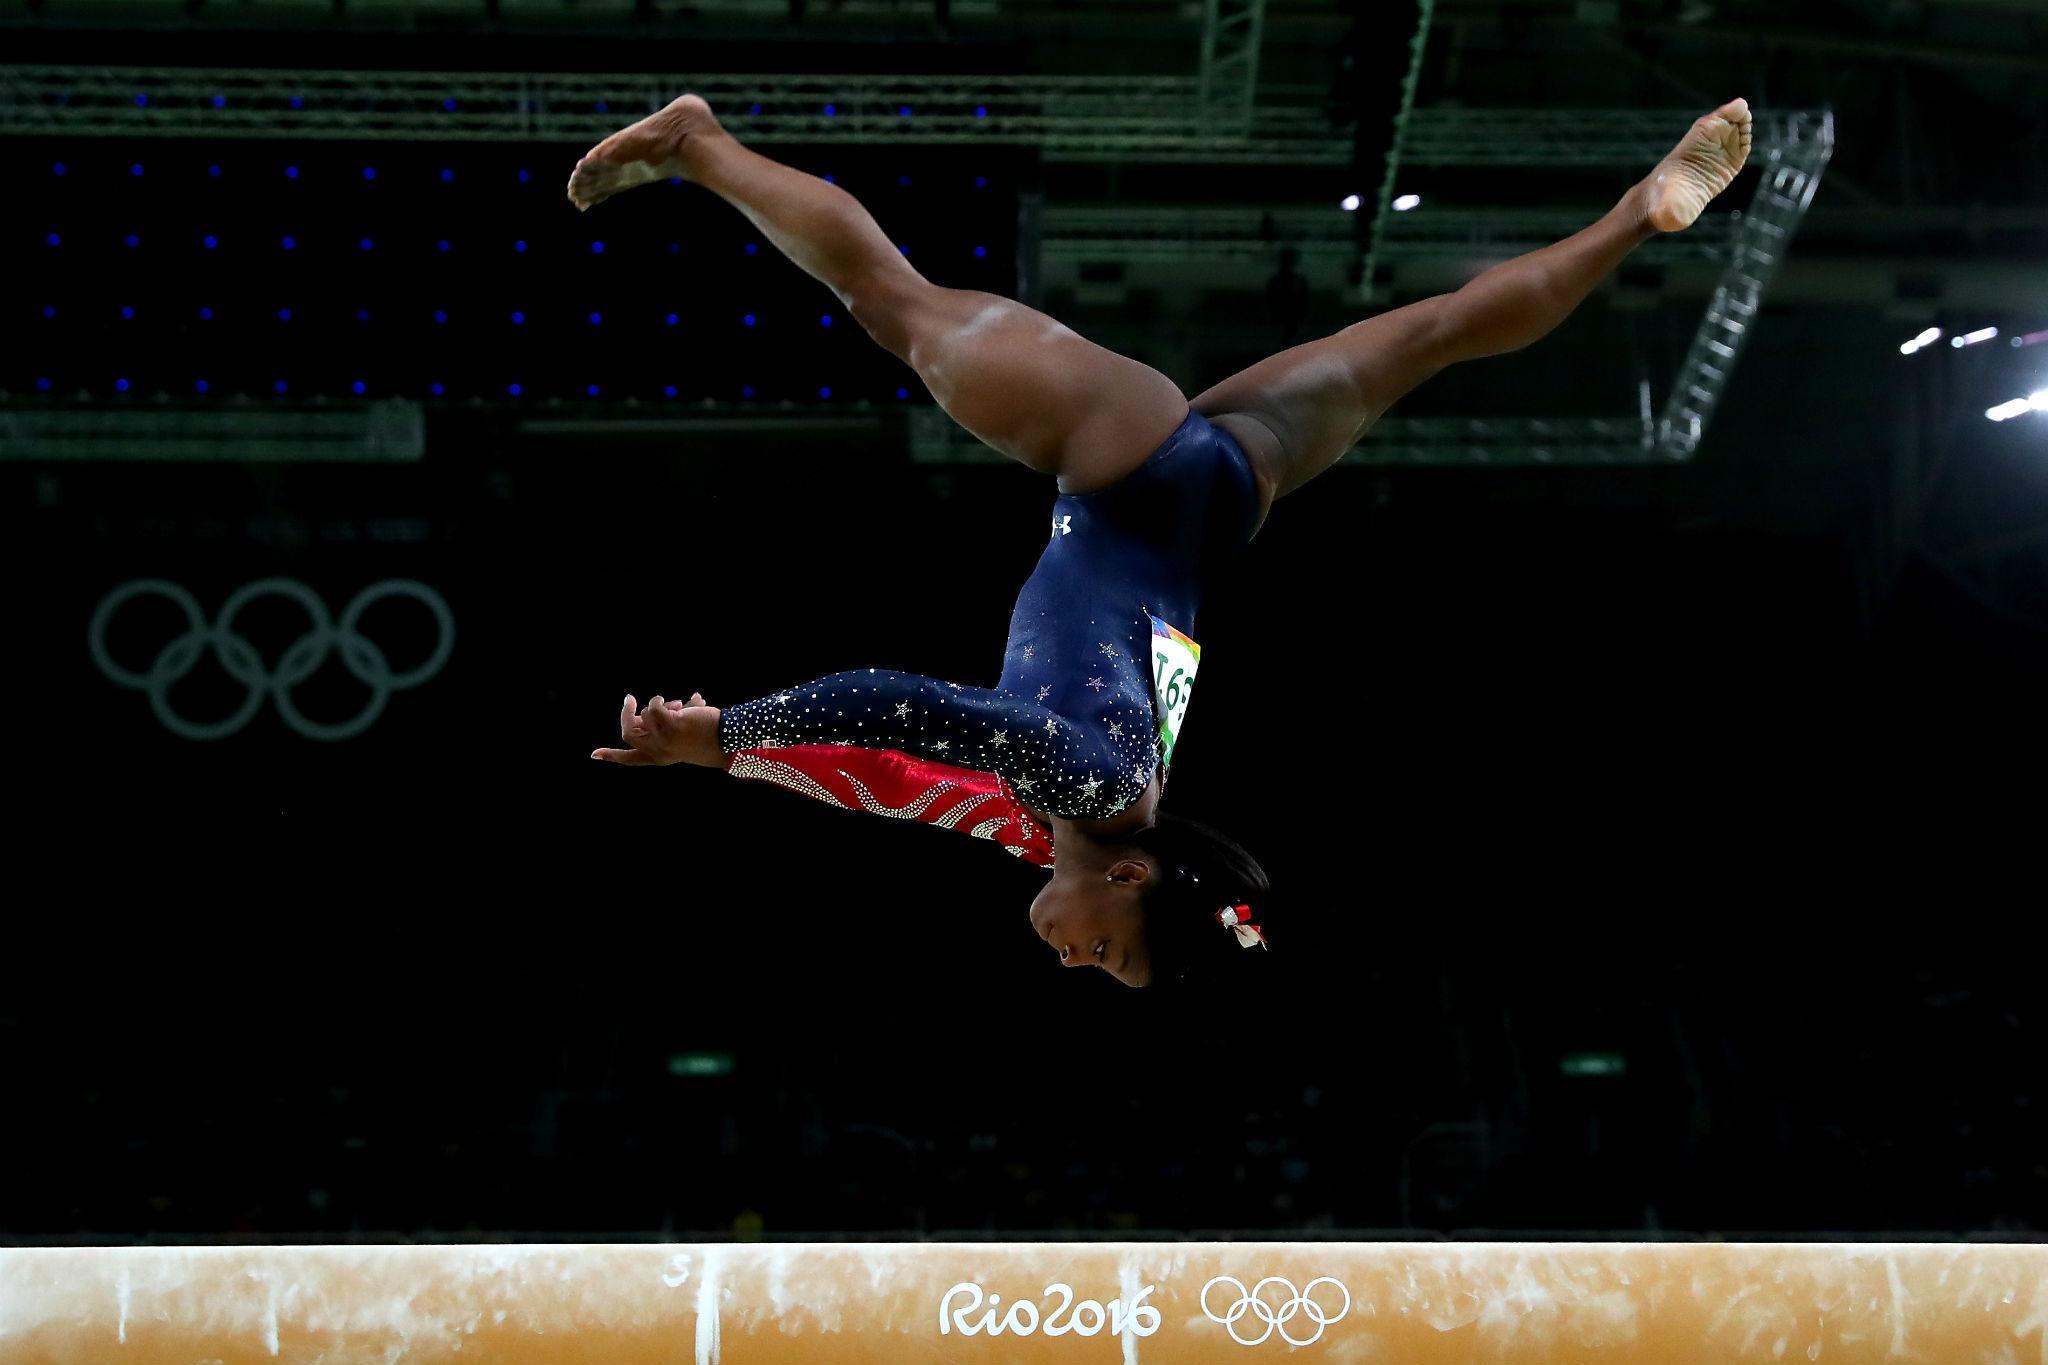 Biles, 19, the reigning three-time world gymnastics champion, is favoured to win the all-around gold medal in Rio.